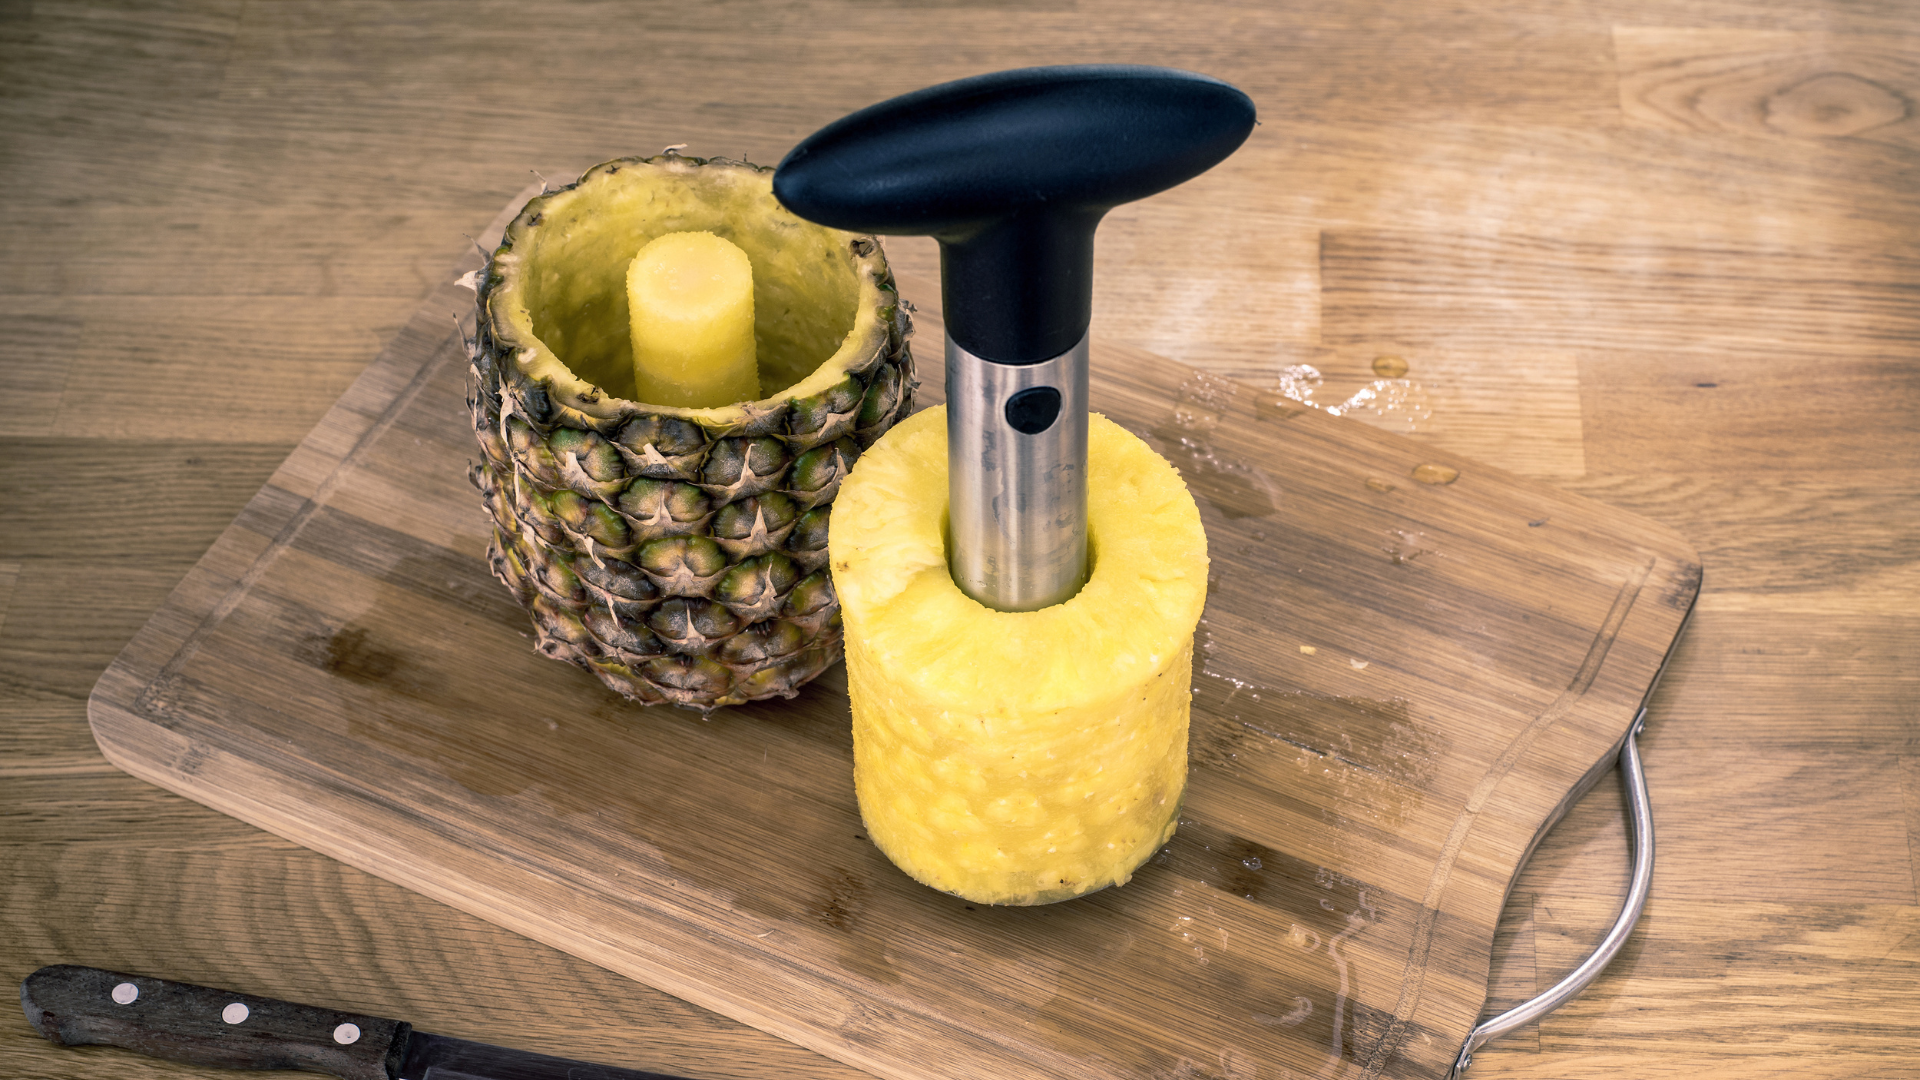 How to Use a Pineapple Corer? Easy and Time-Saving!